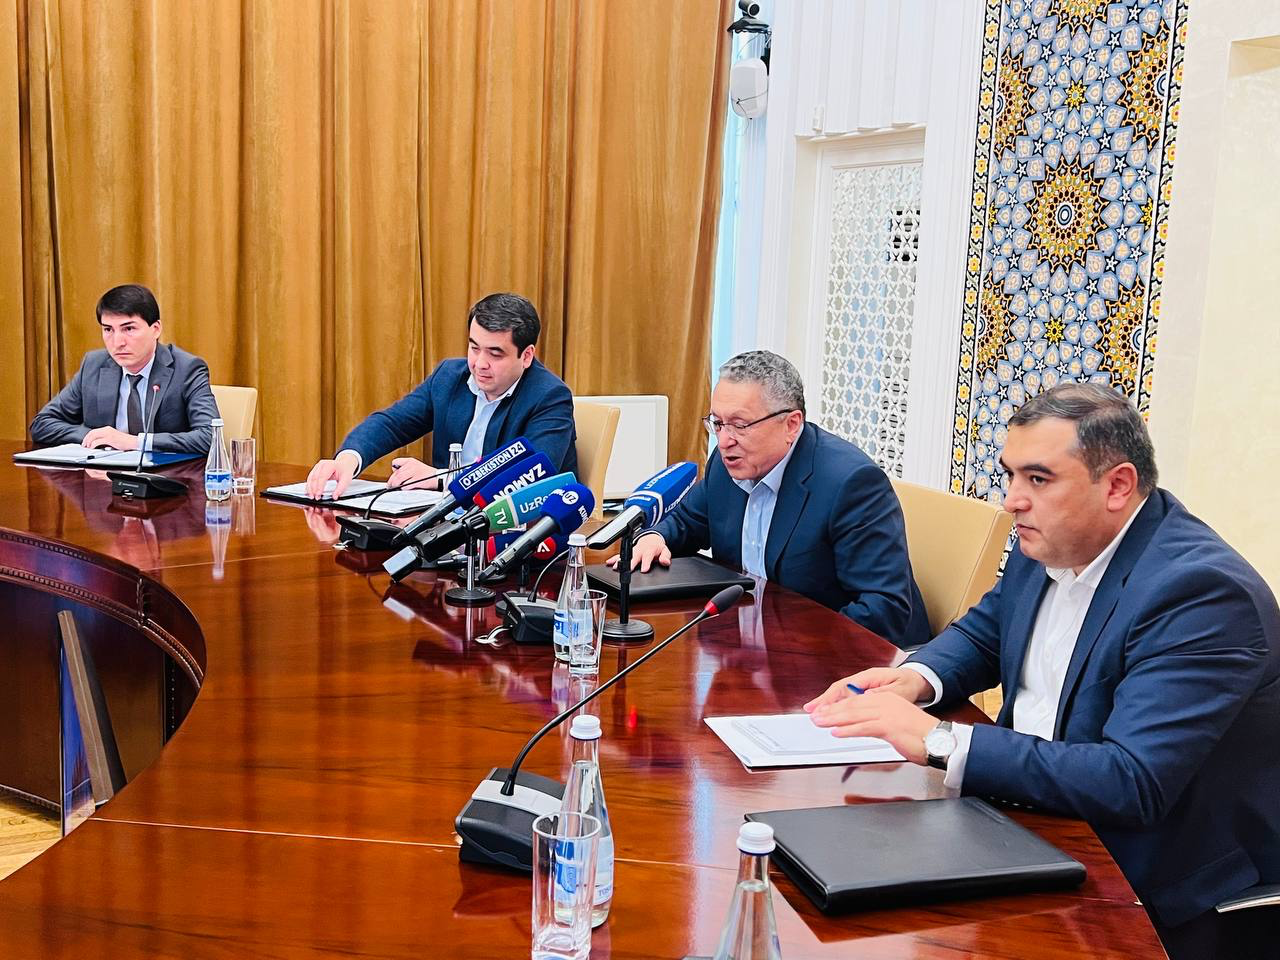 Press conference held at the Central Bank